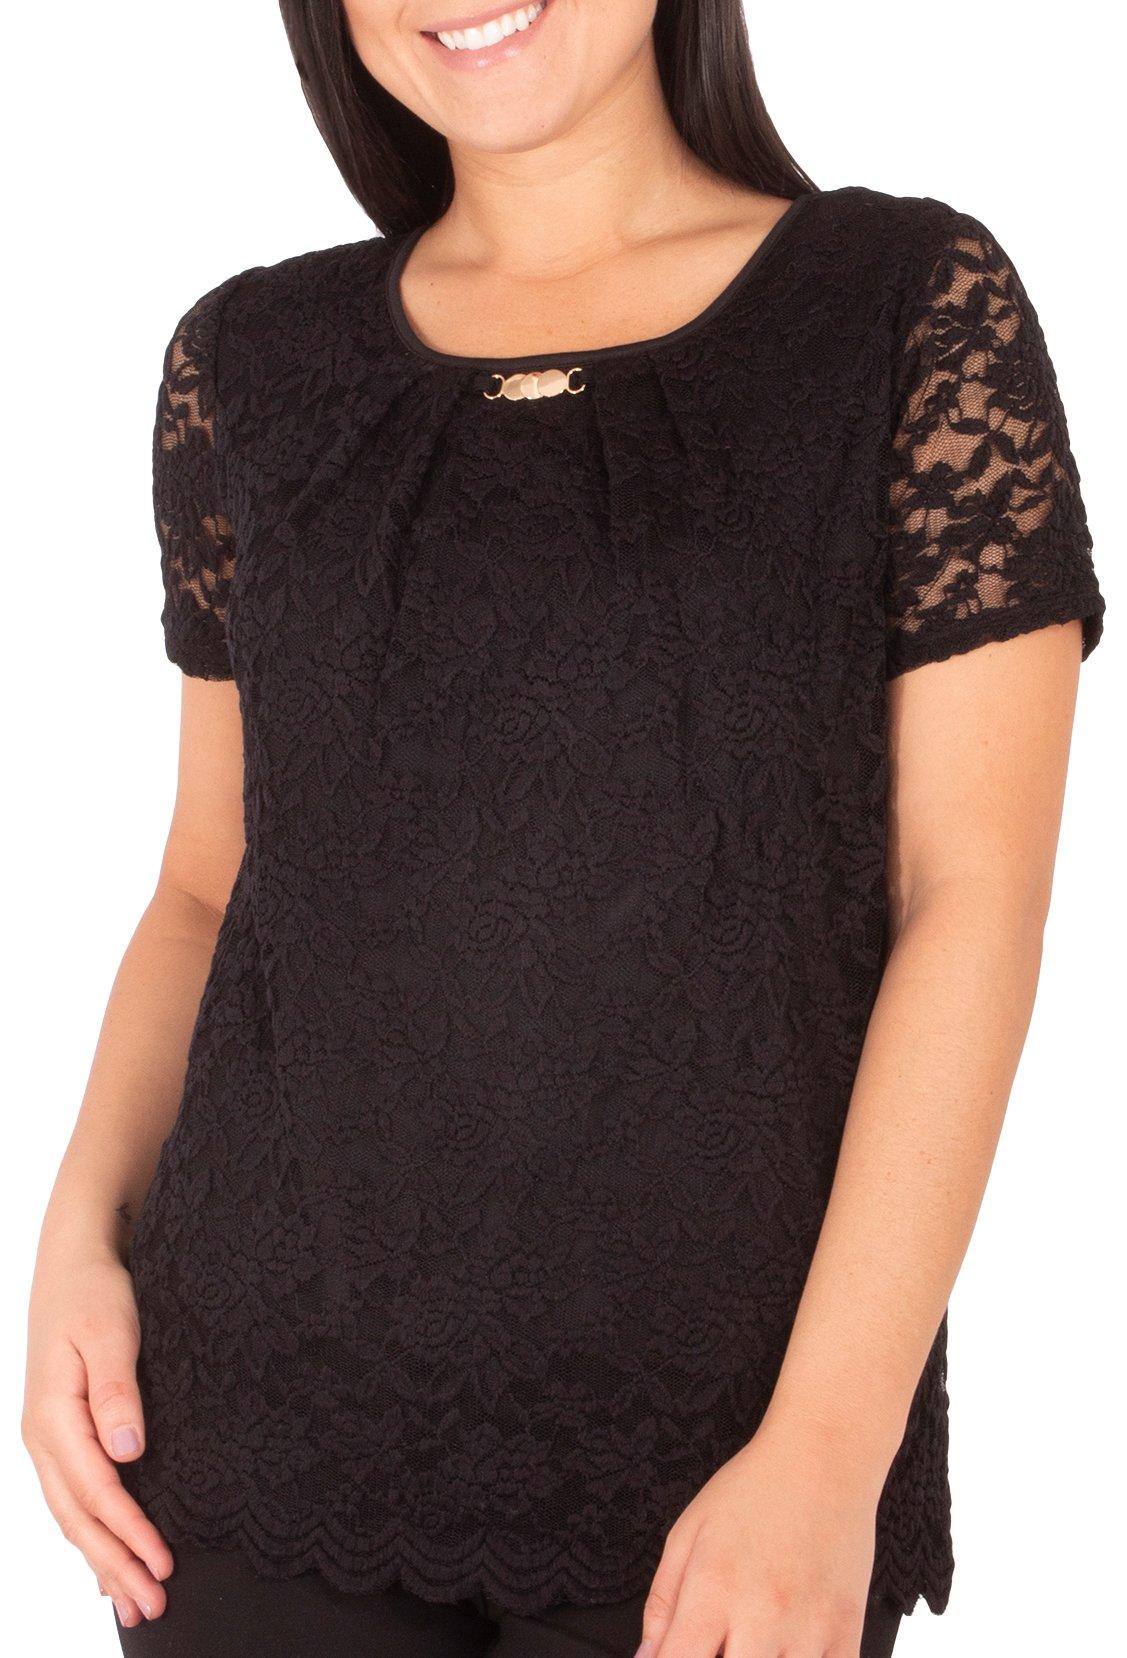 NY Collection Petite Jewel Neck Lace Short Sleeve Top